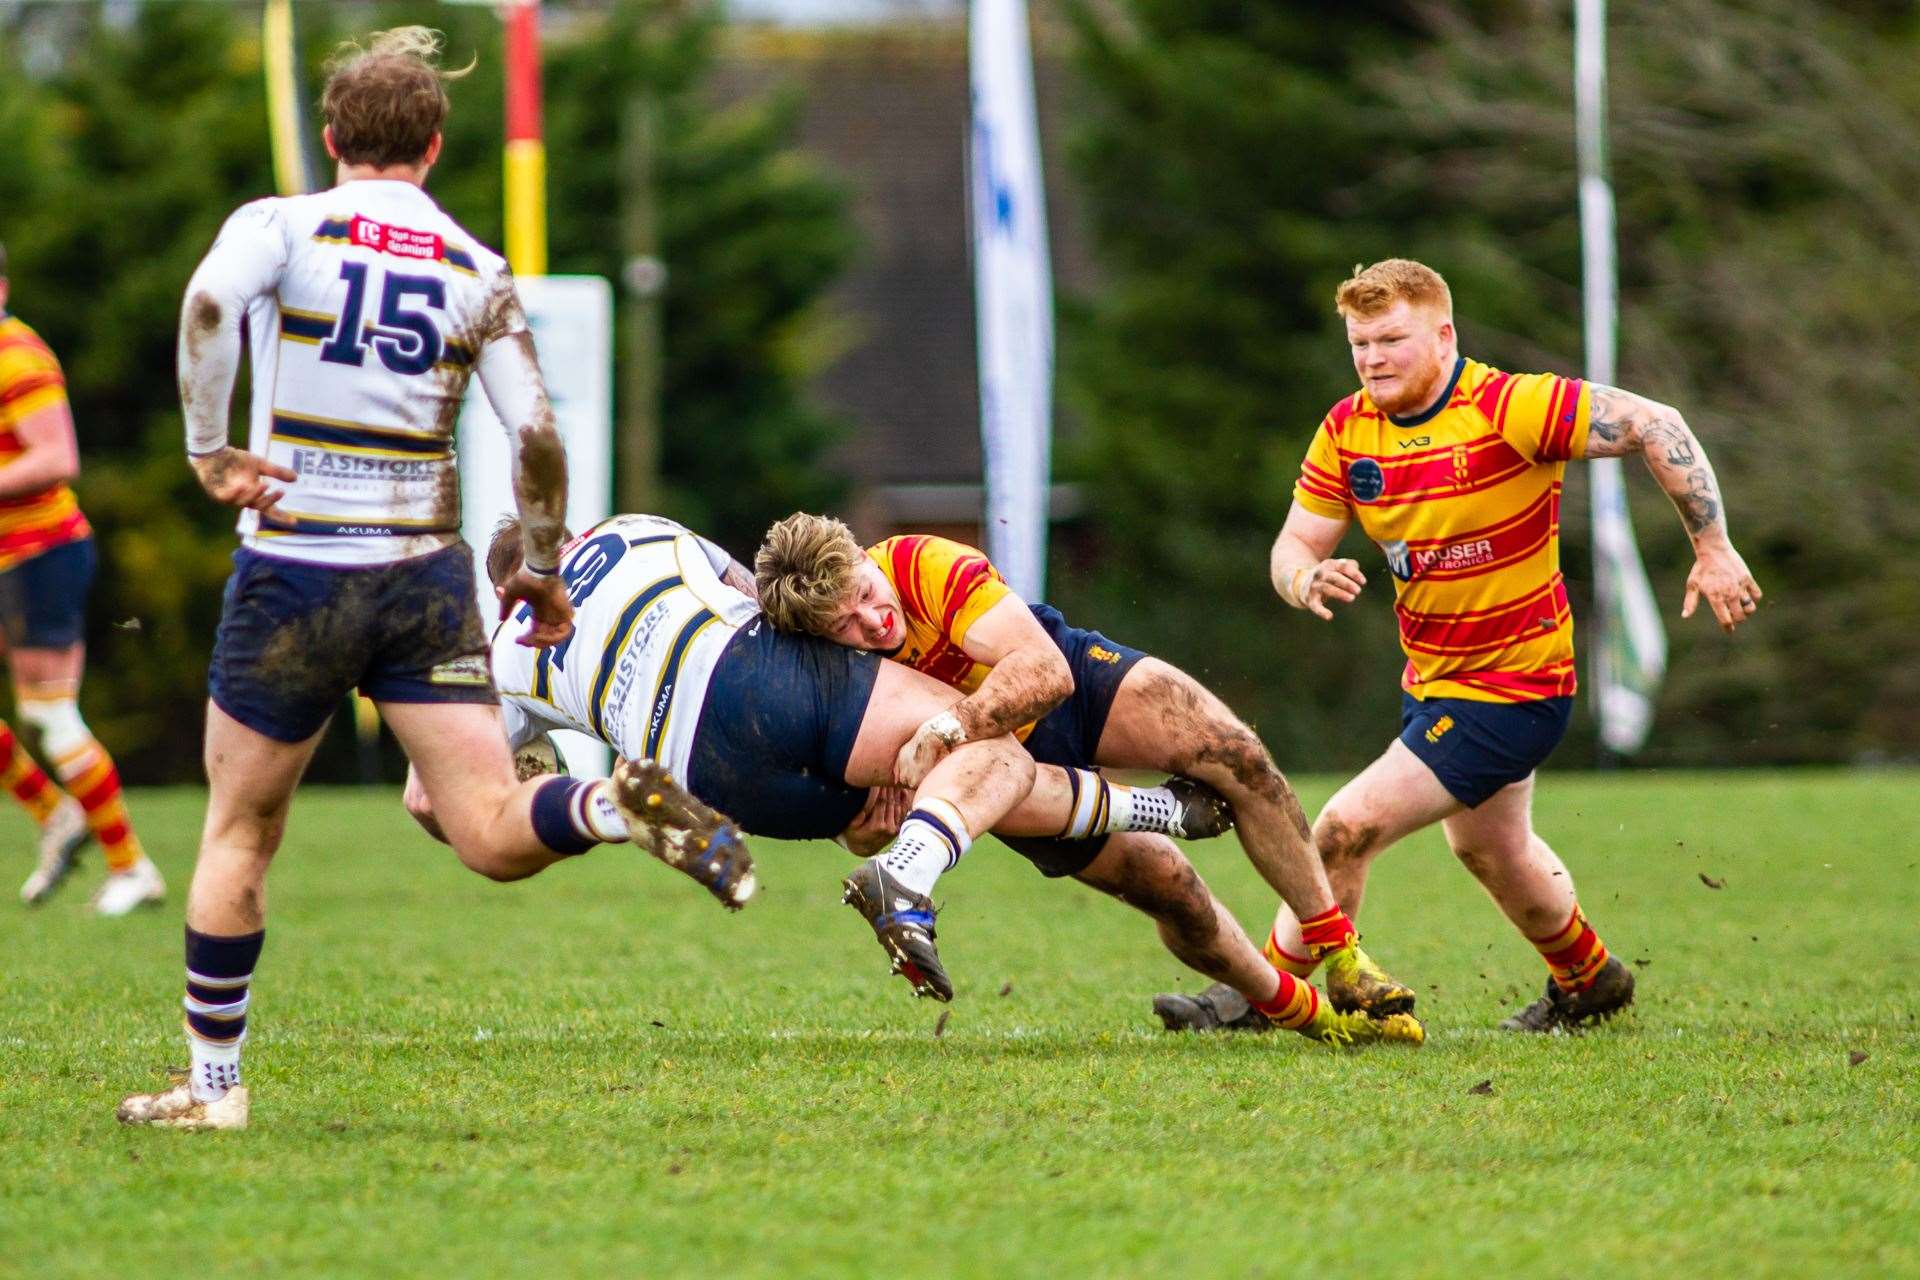 Medway's Alfie Orris making the tackle supported by Antony Clement